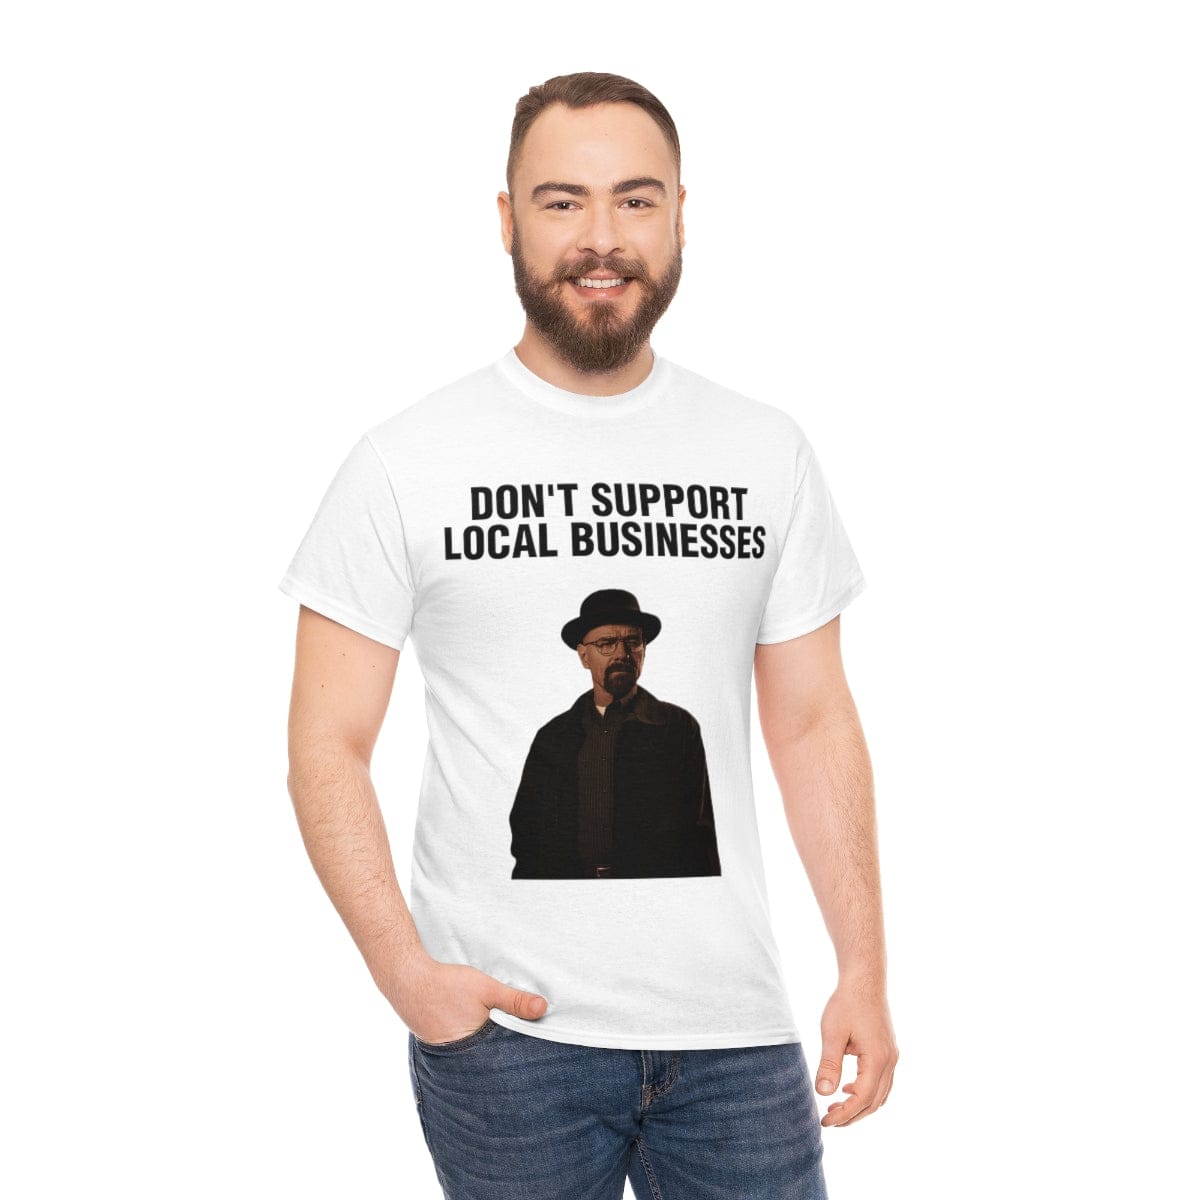 DON'T SUPPORT LOCAL BUSINESS